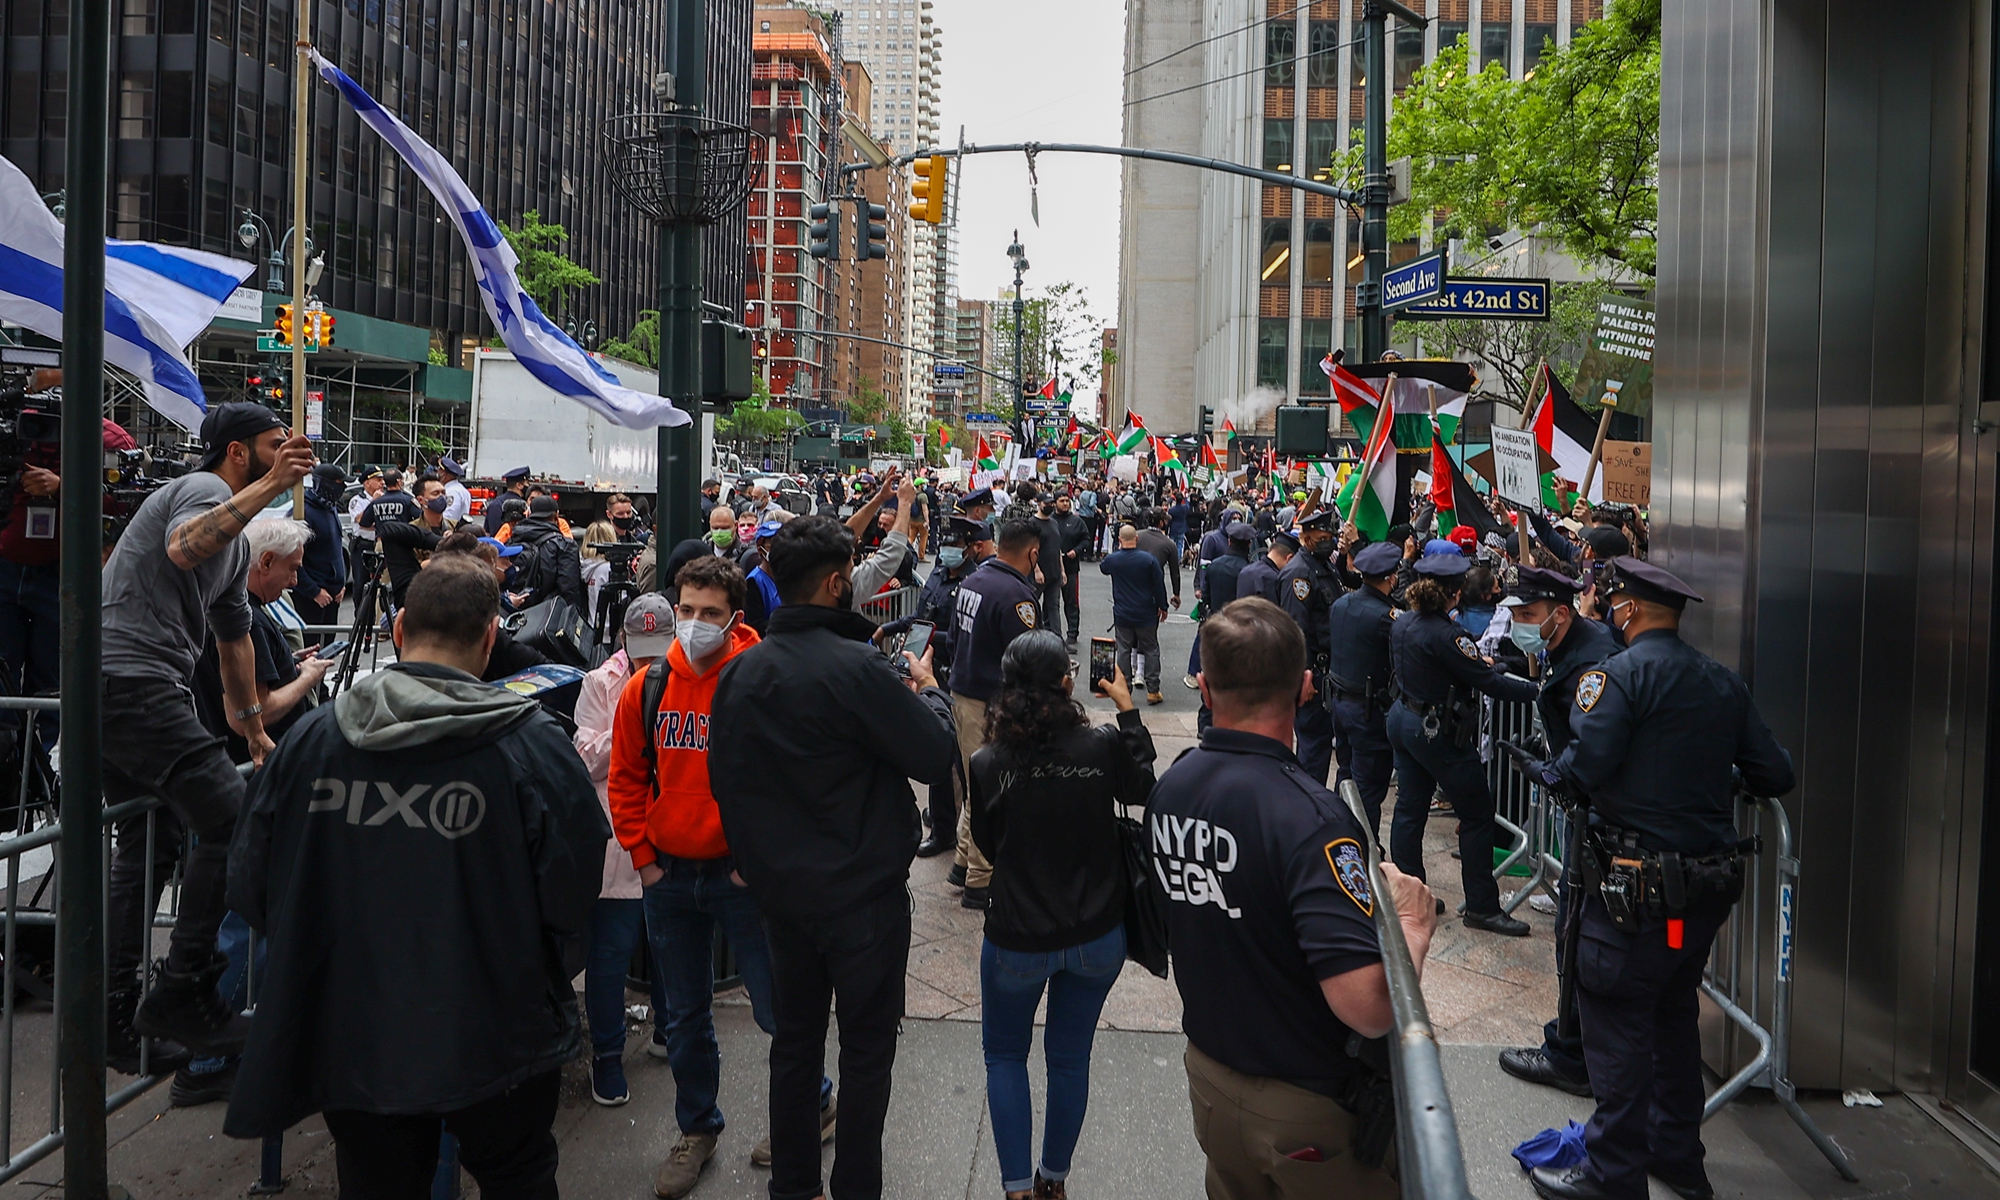 Hundreds of people gather in front of the consulate general of Israel in New York City on Tuesday to protest Israeli attacks on Gaza and Al-Aqsa mosque. Photo: VCG